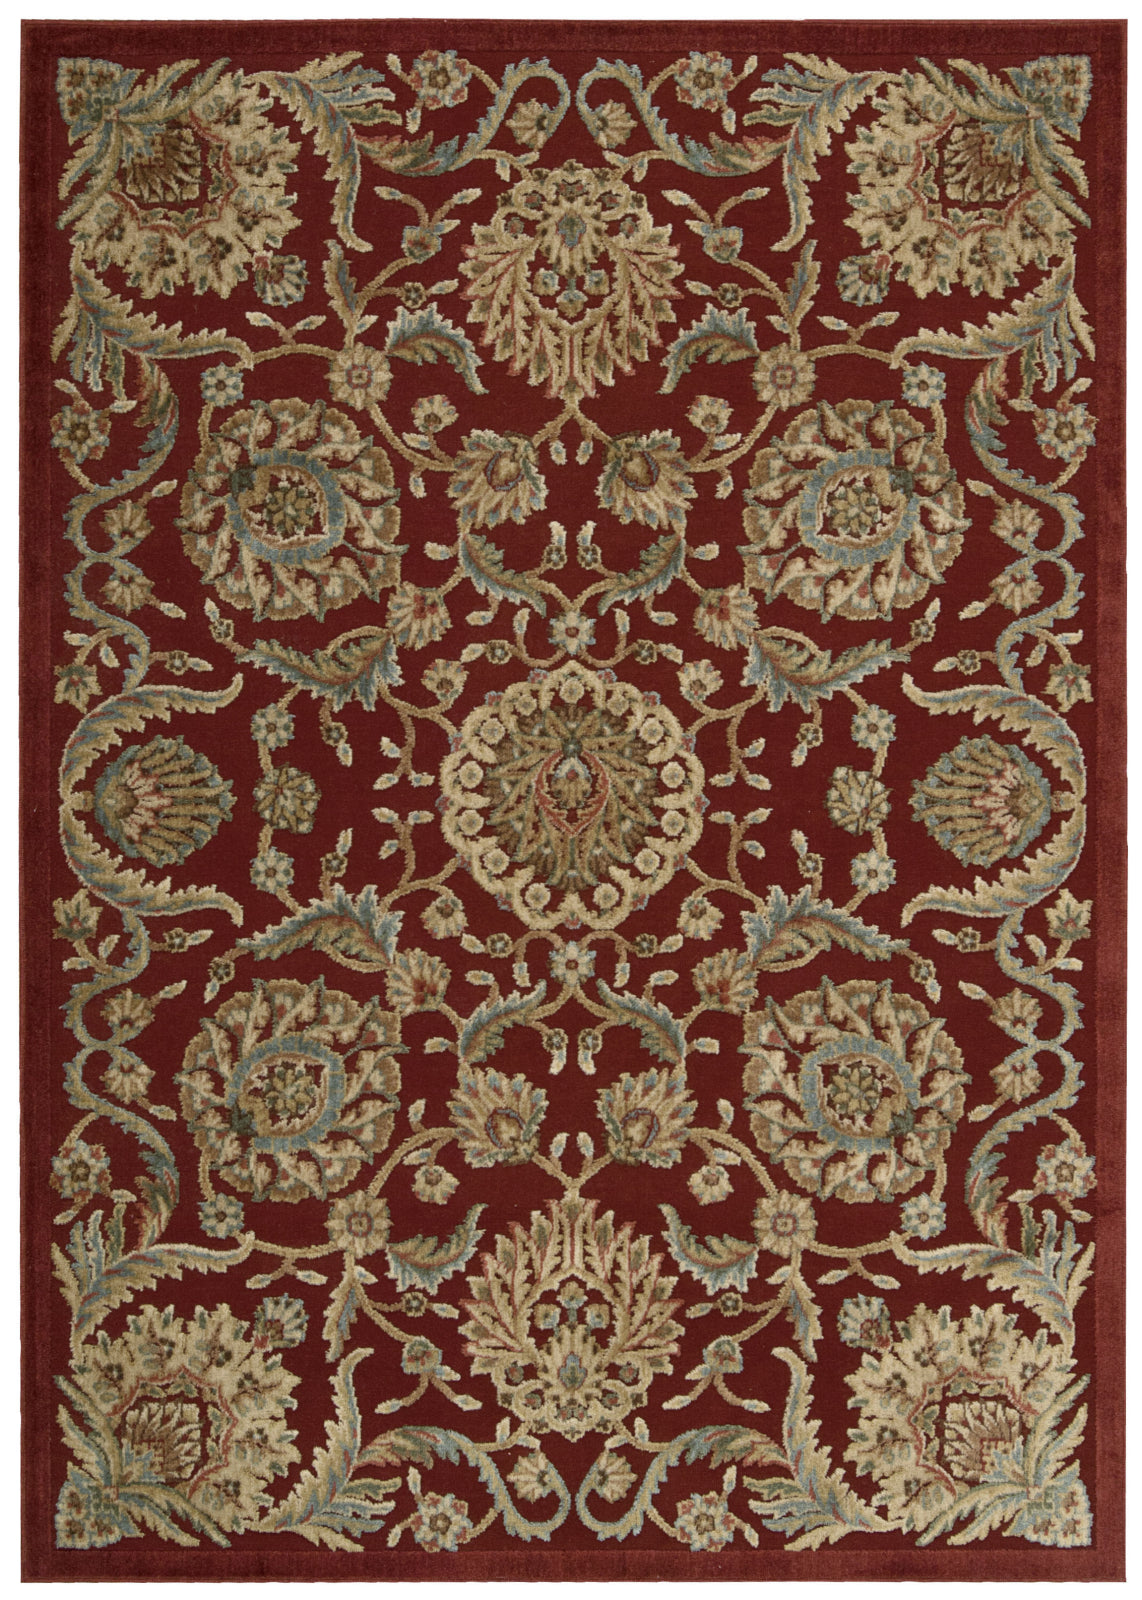 Nourison Graphic Illusions GIL17 Red Area Rug main image